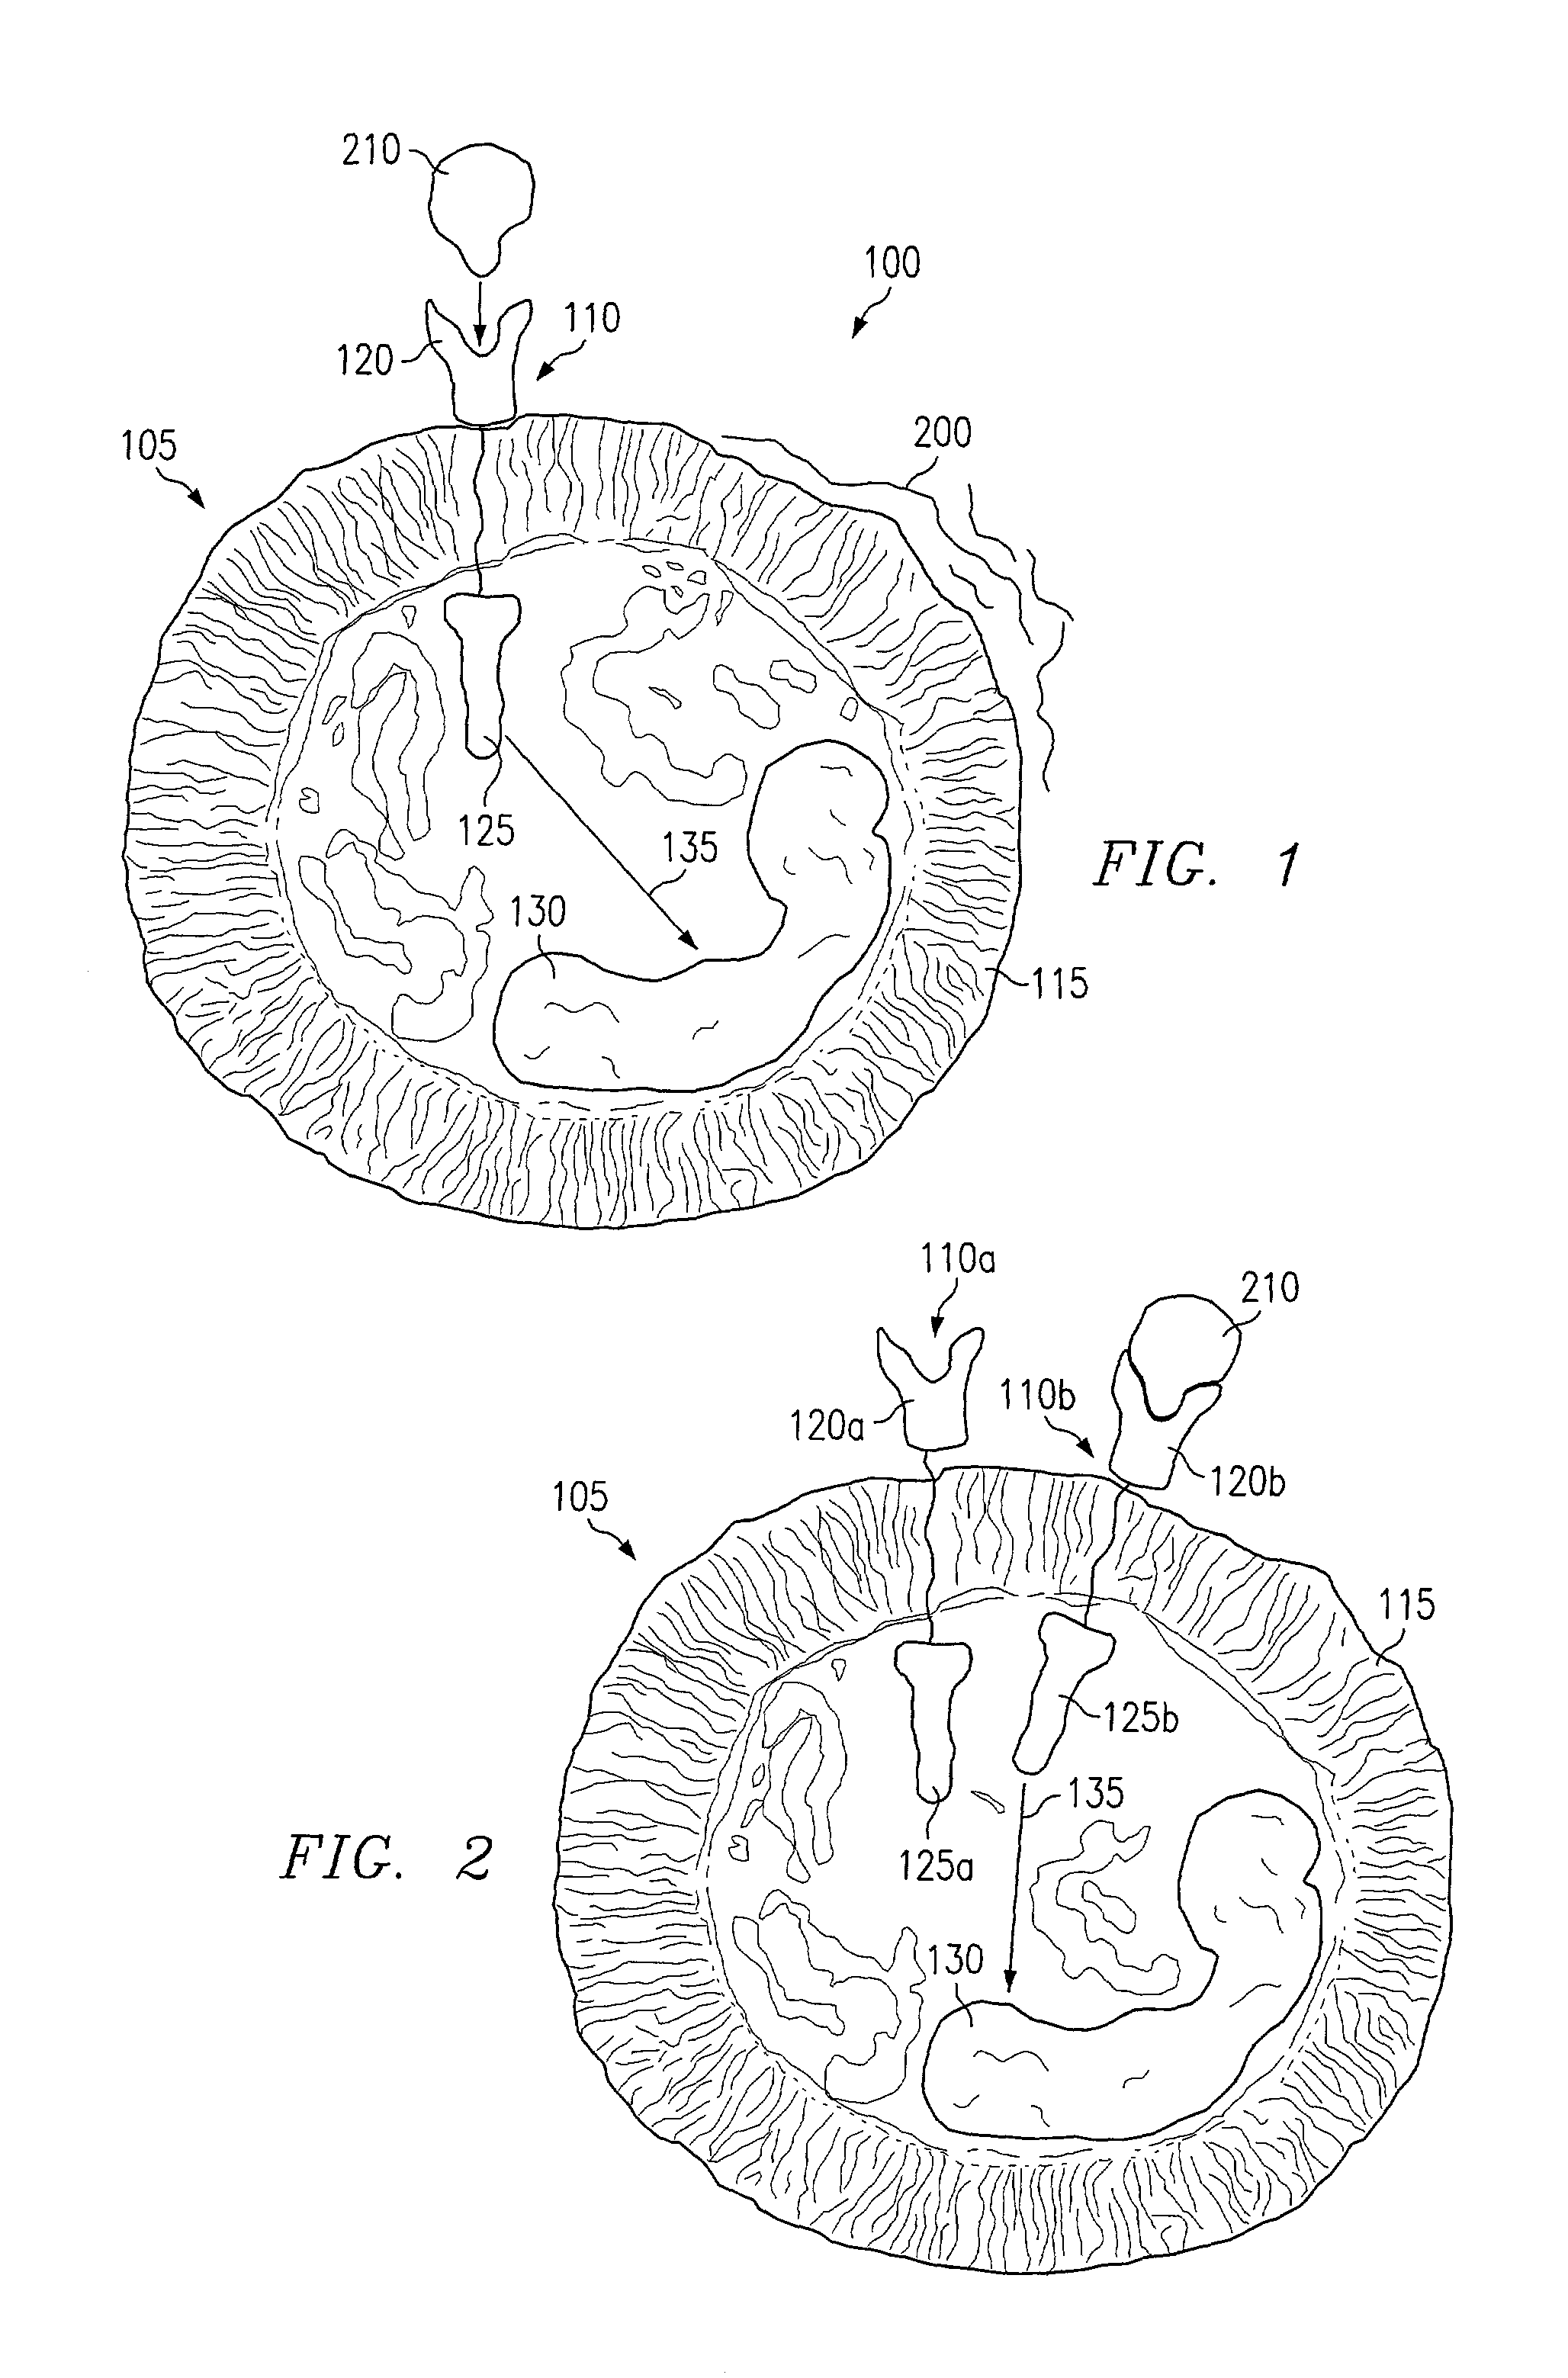 Methods of stimulating cell receptor activity using electromagnetic fields